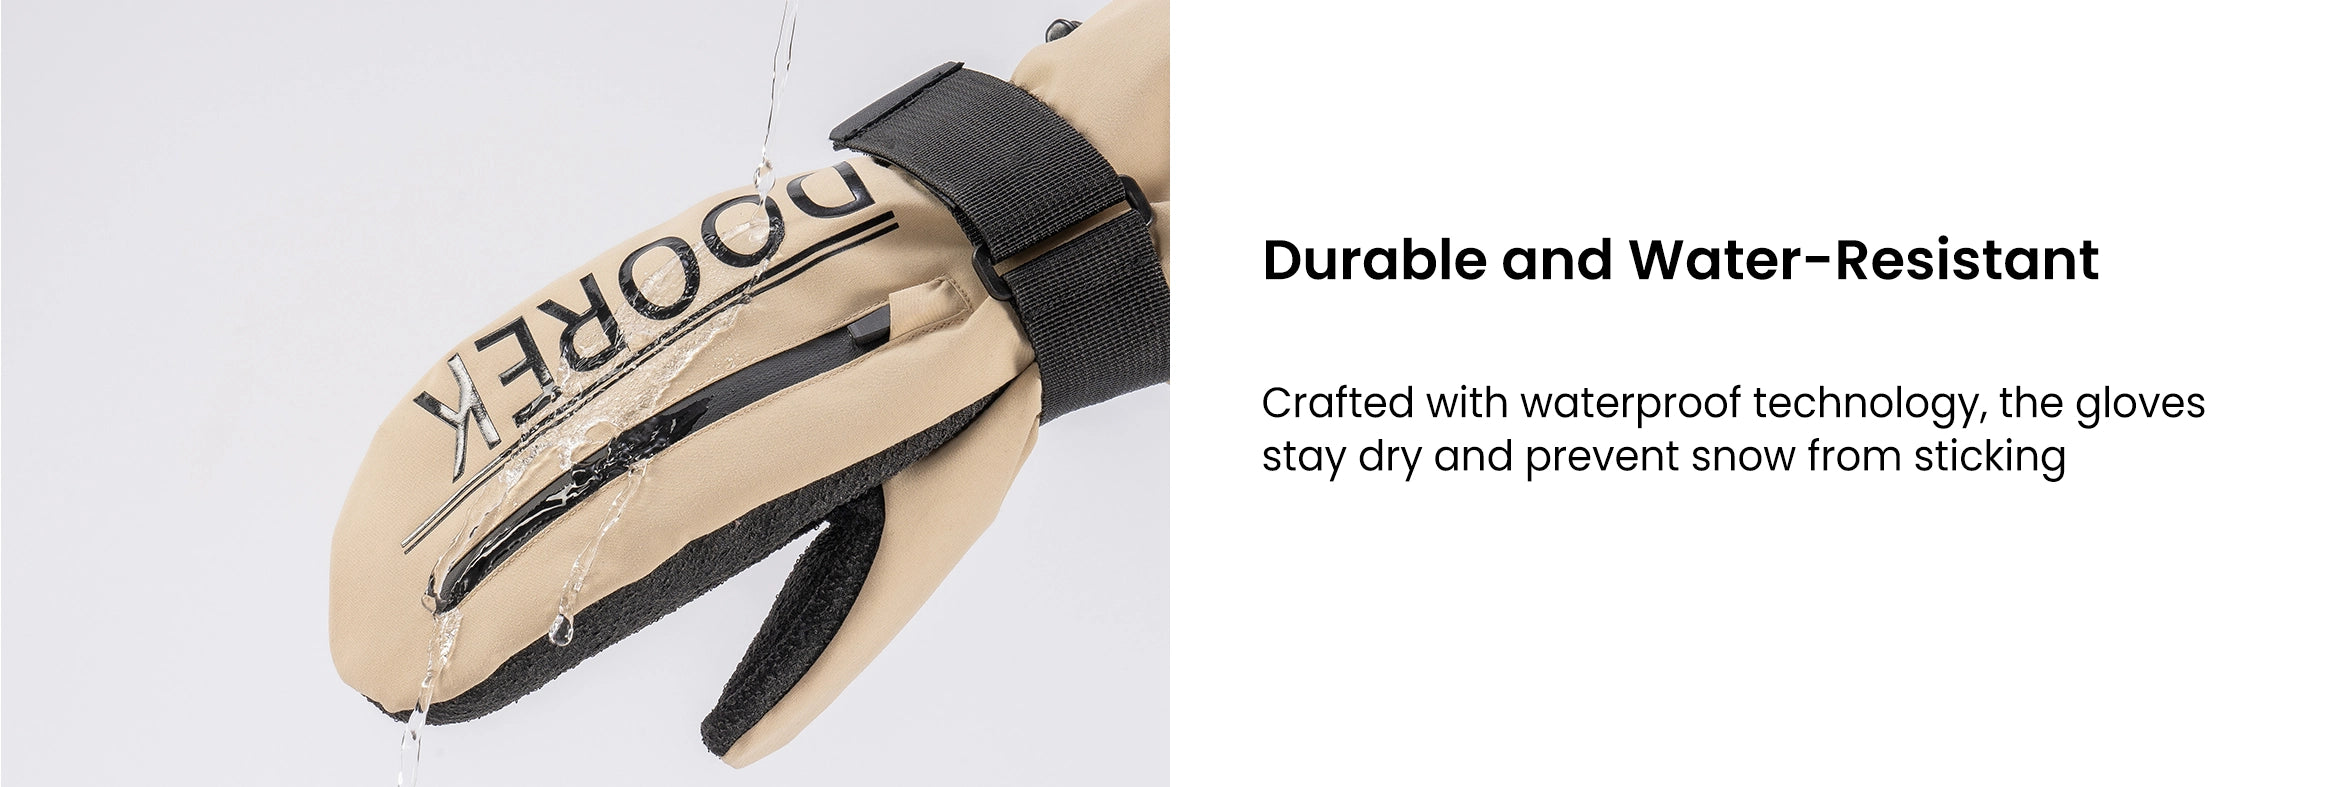 6. Durable and Water-Resistant